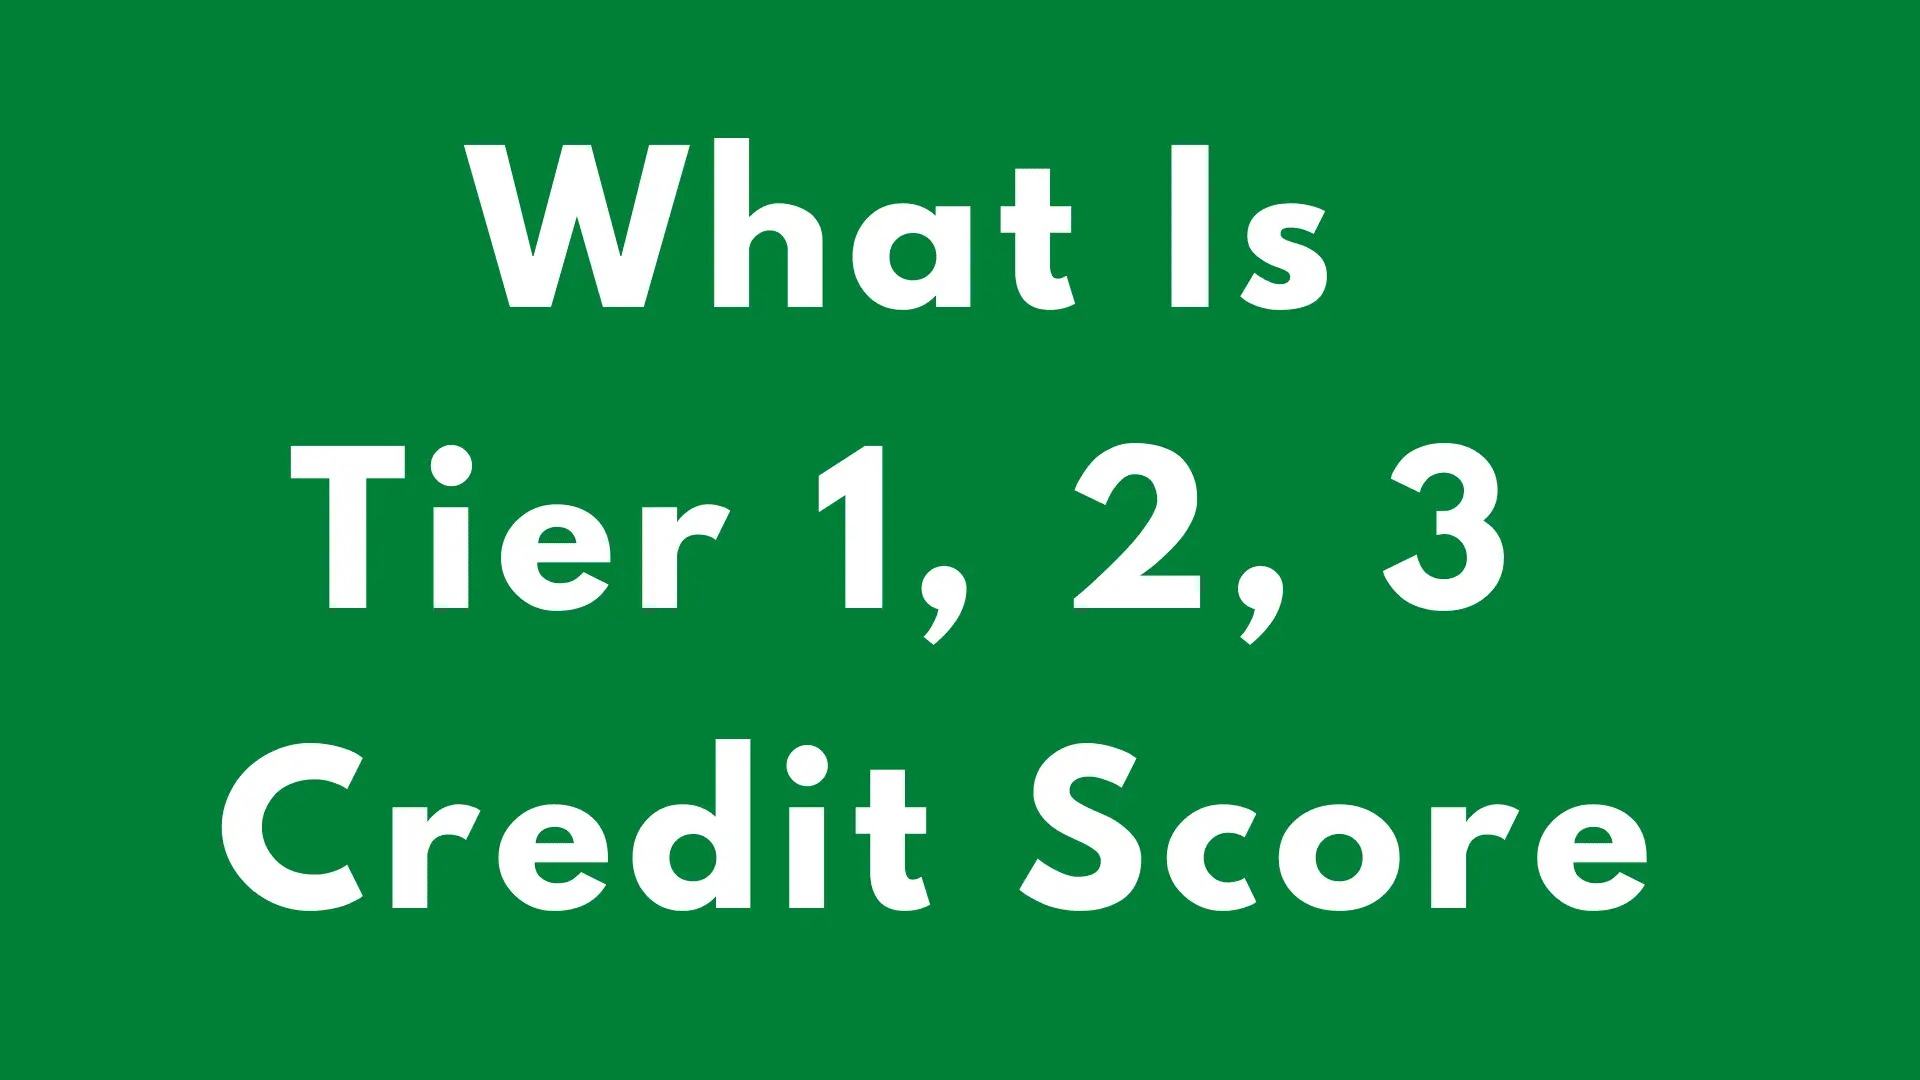 What Is Considered Tier 1 Credit